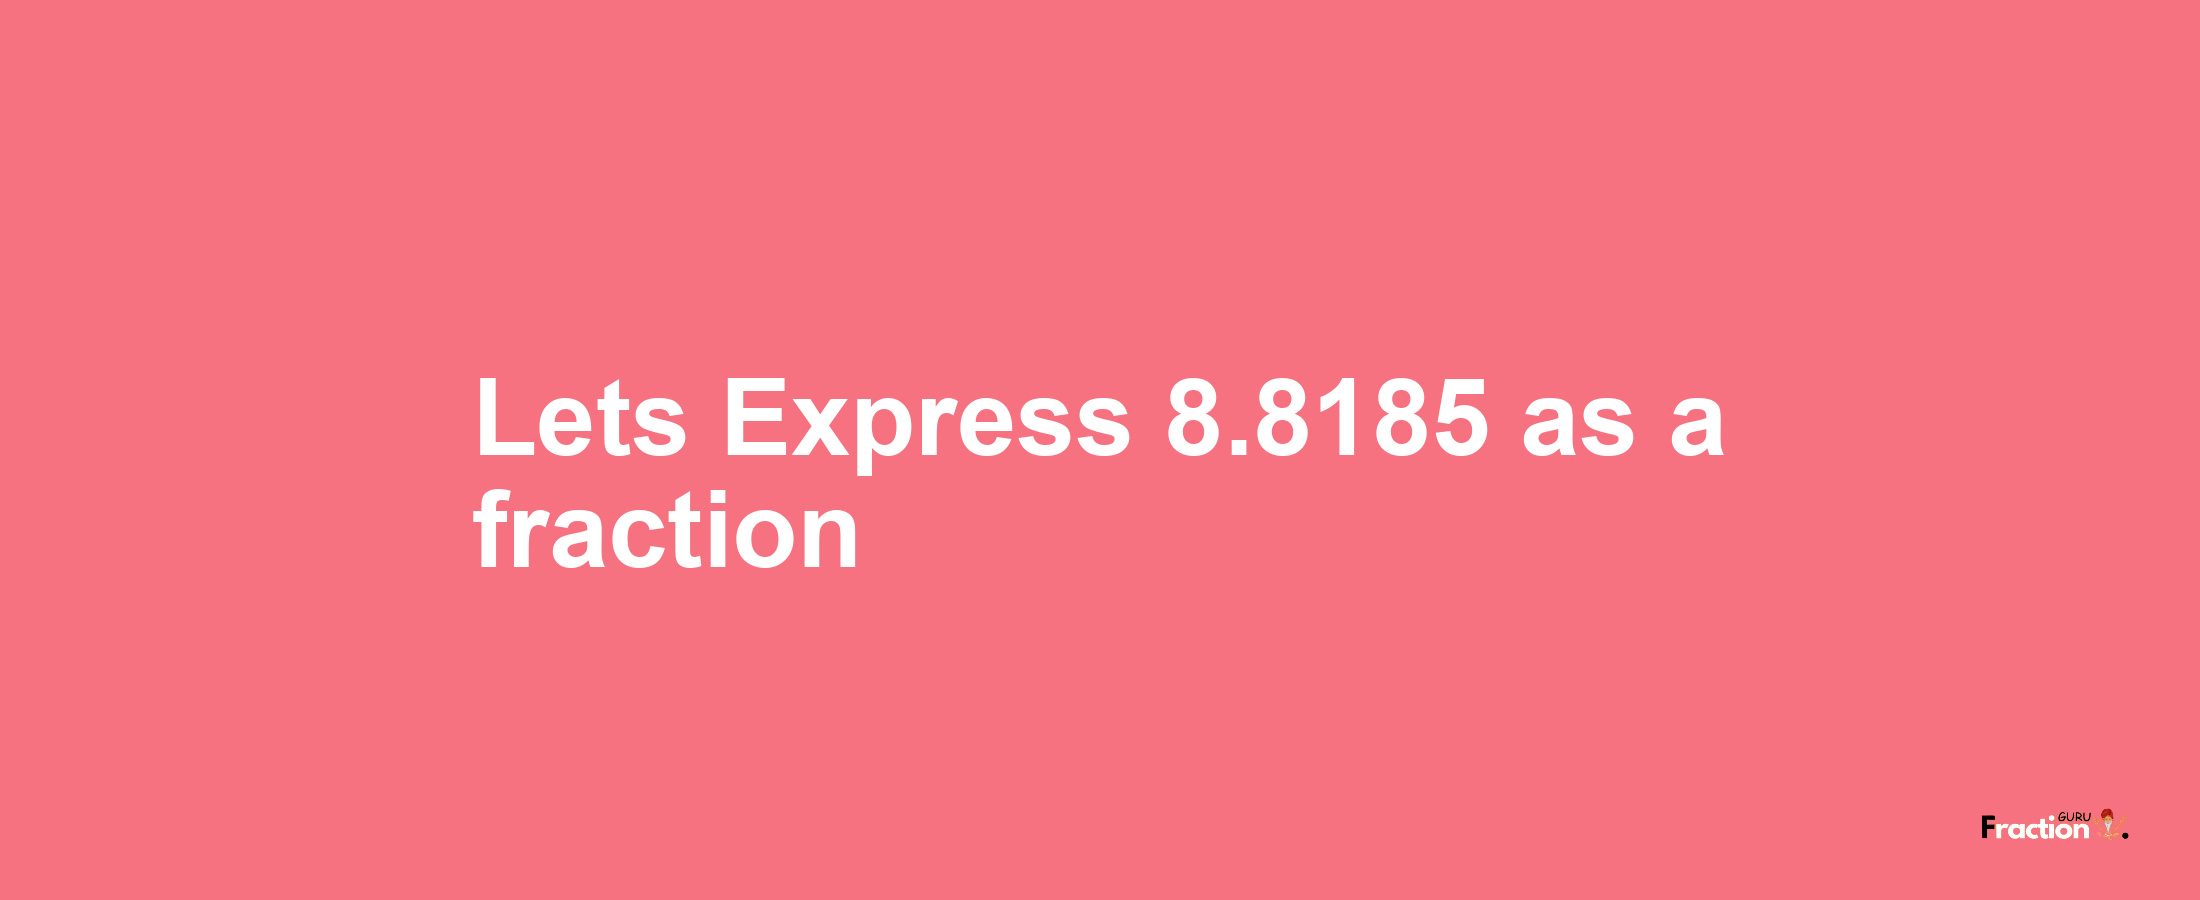 Lets Express 8.8185 as afraction